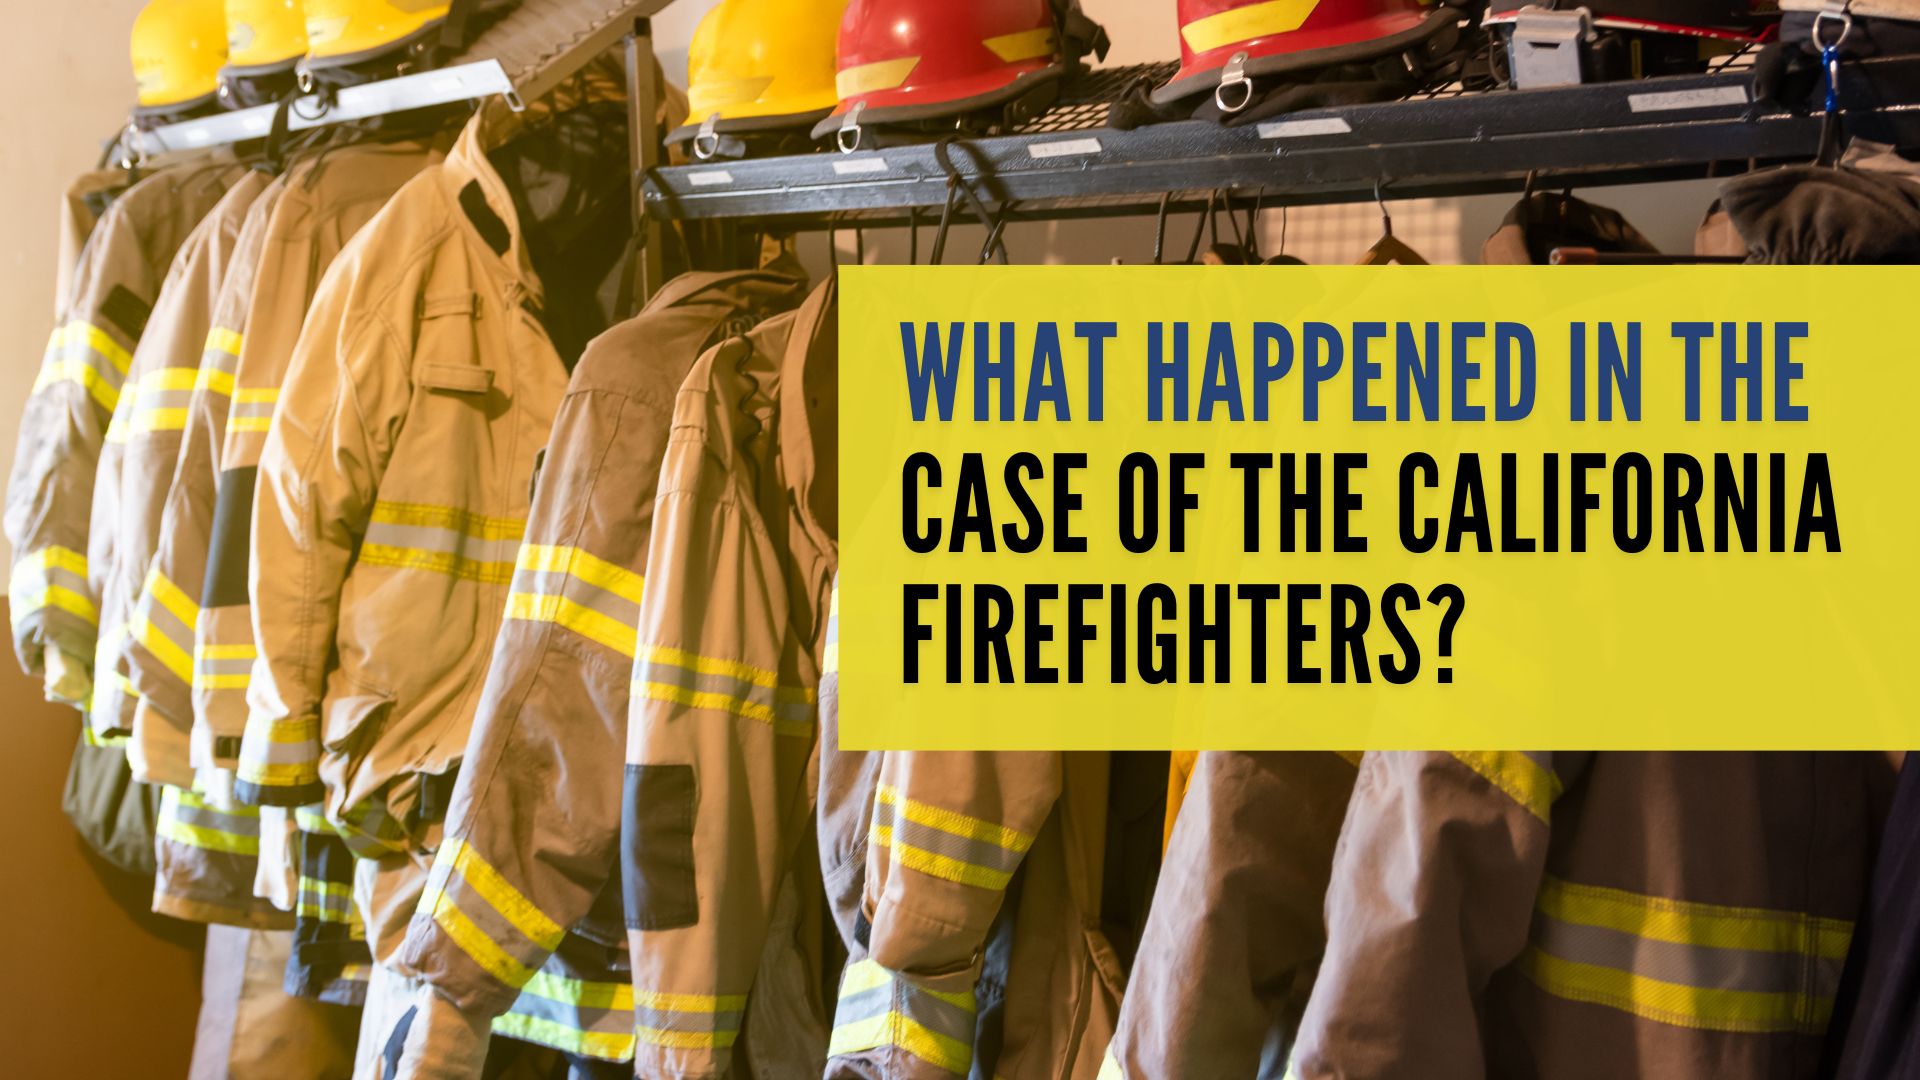 What Happened in the Case of the California Firefighters?